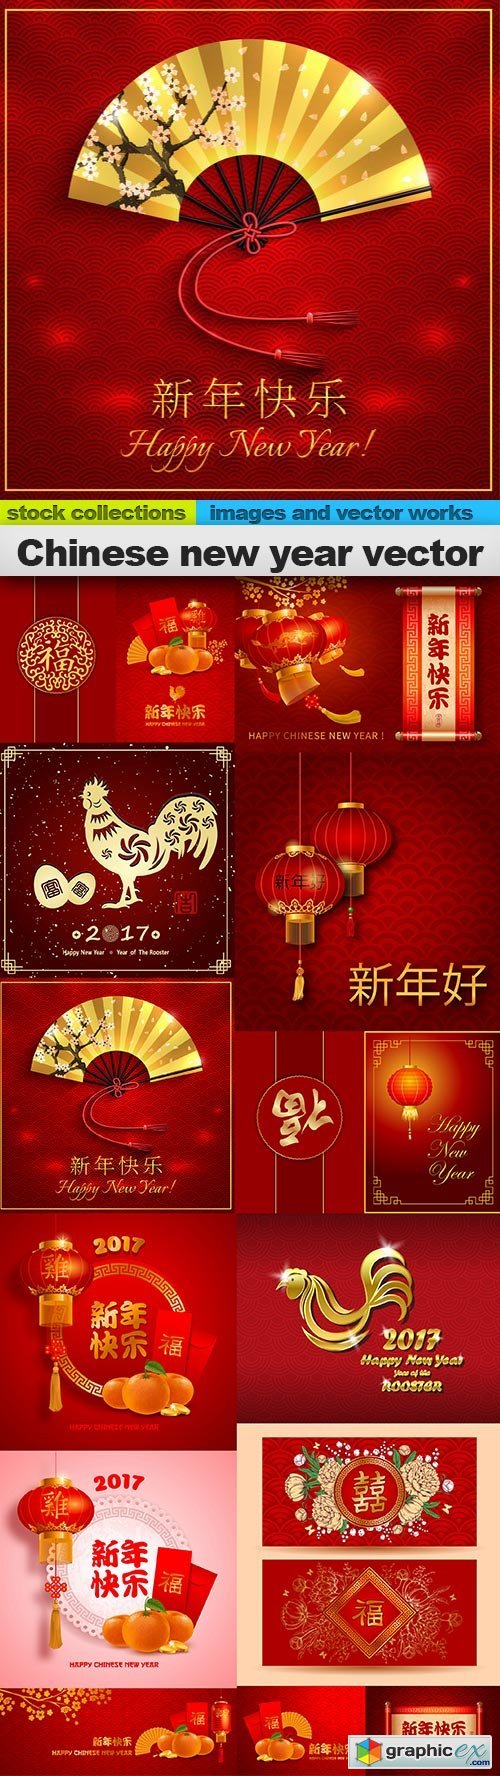 Chinese new year vector, 15 x EPS